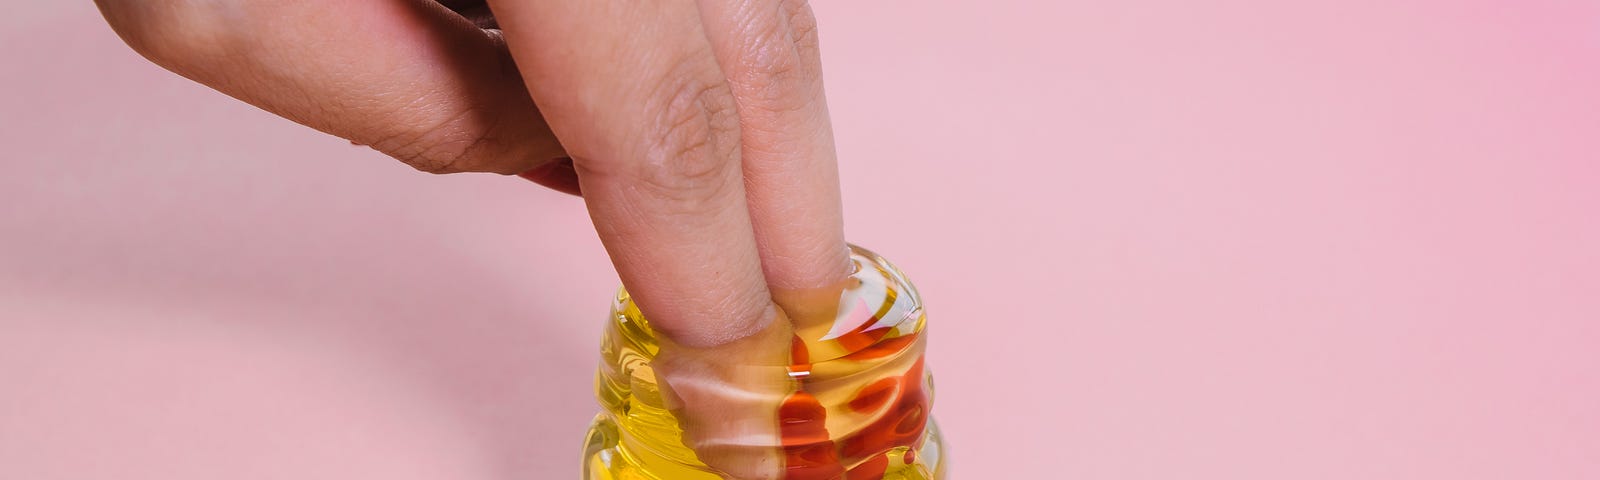 A man dips two fingers into a small jar of honey. Pink background. Honey has antibacterial and anti-fungal properties.